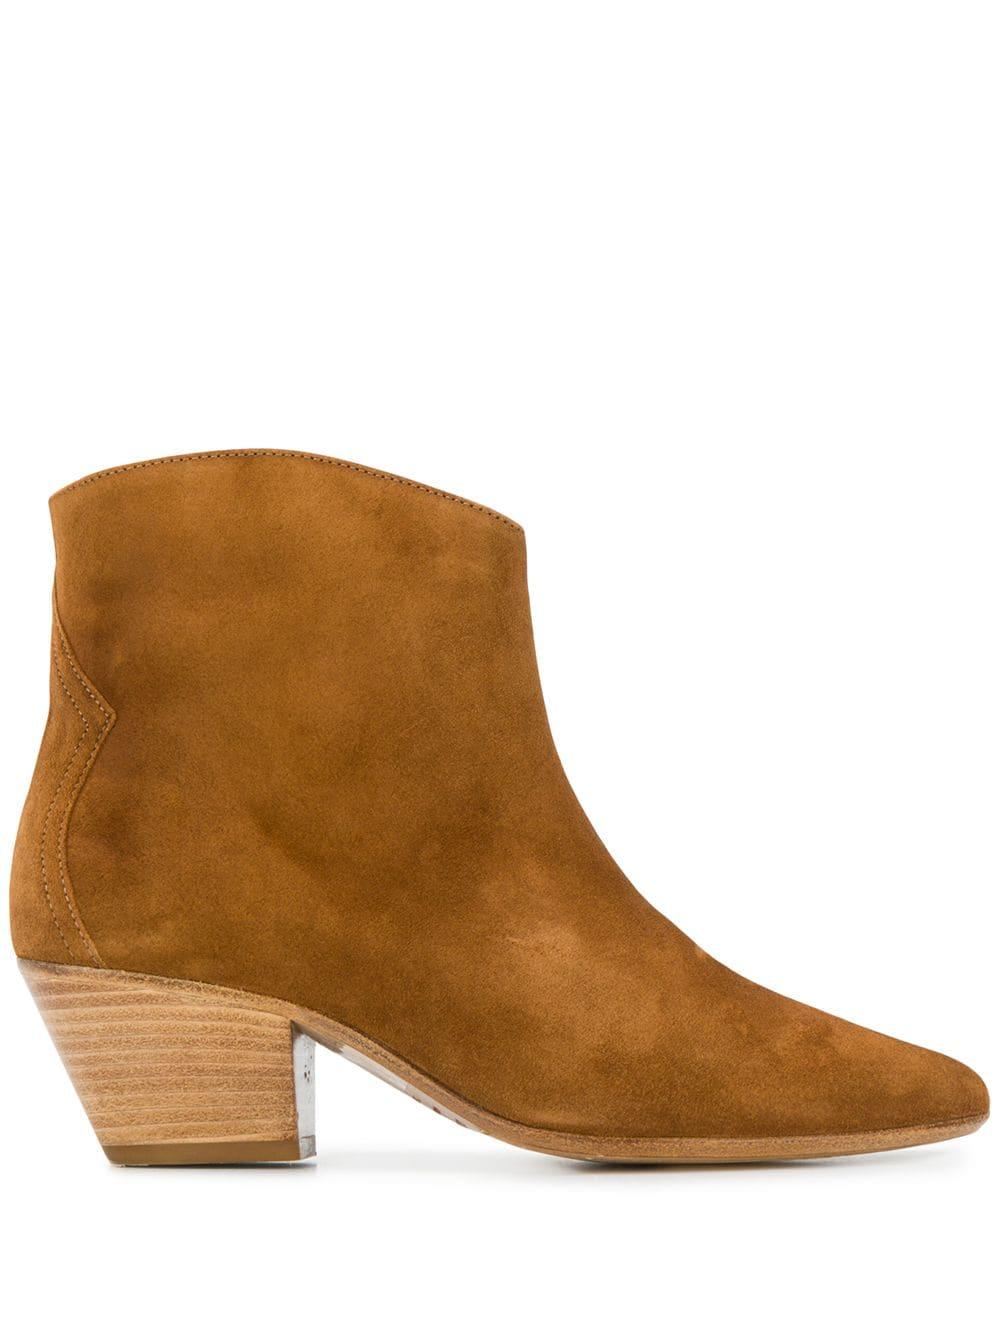 Isabel Marant Leather Dacken Ankle Boots in Brown - Lyst